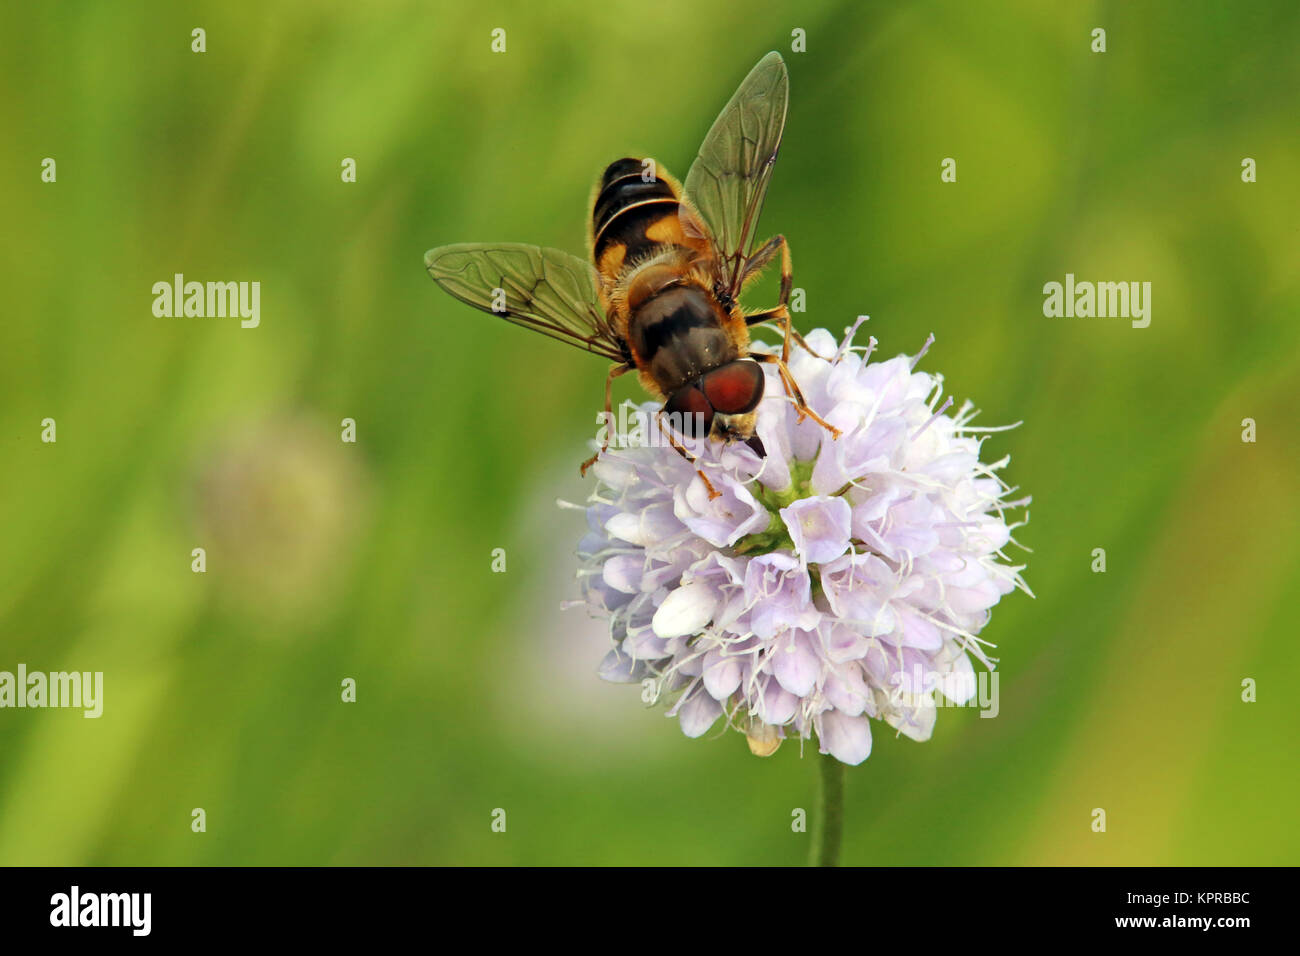 hoverfly on moorabbiss Stock Photo